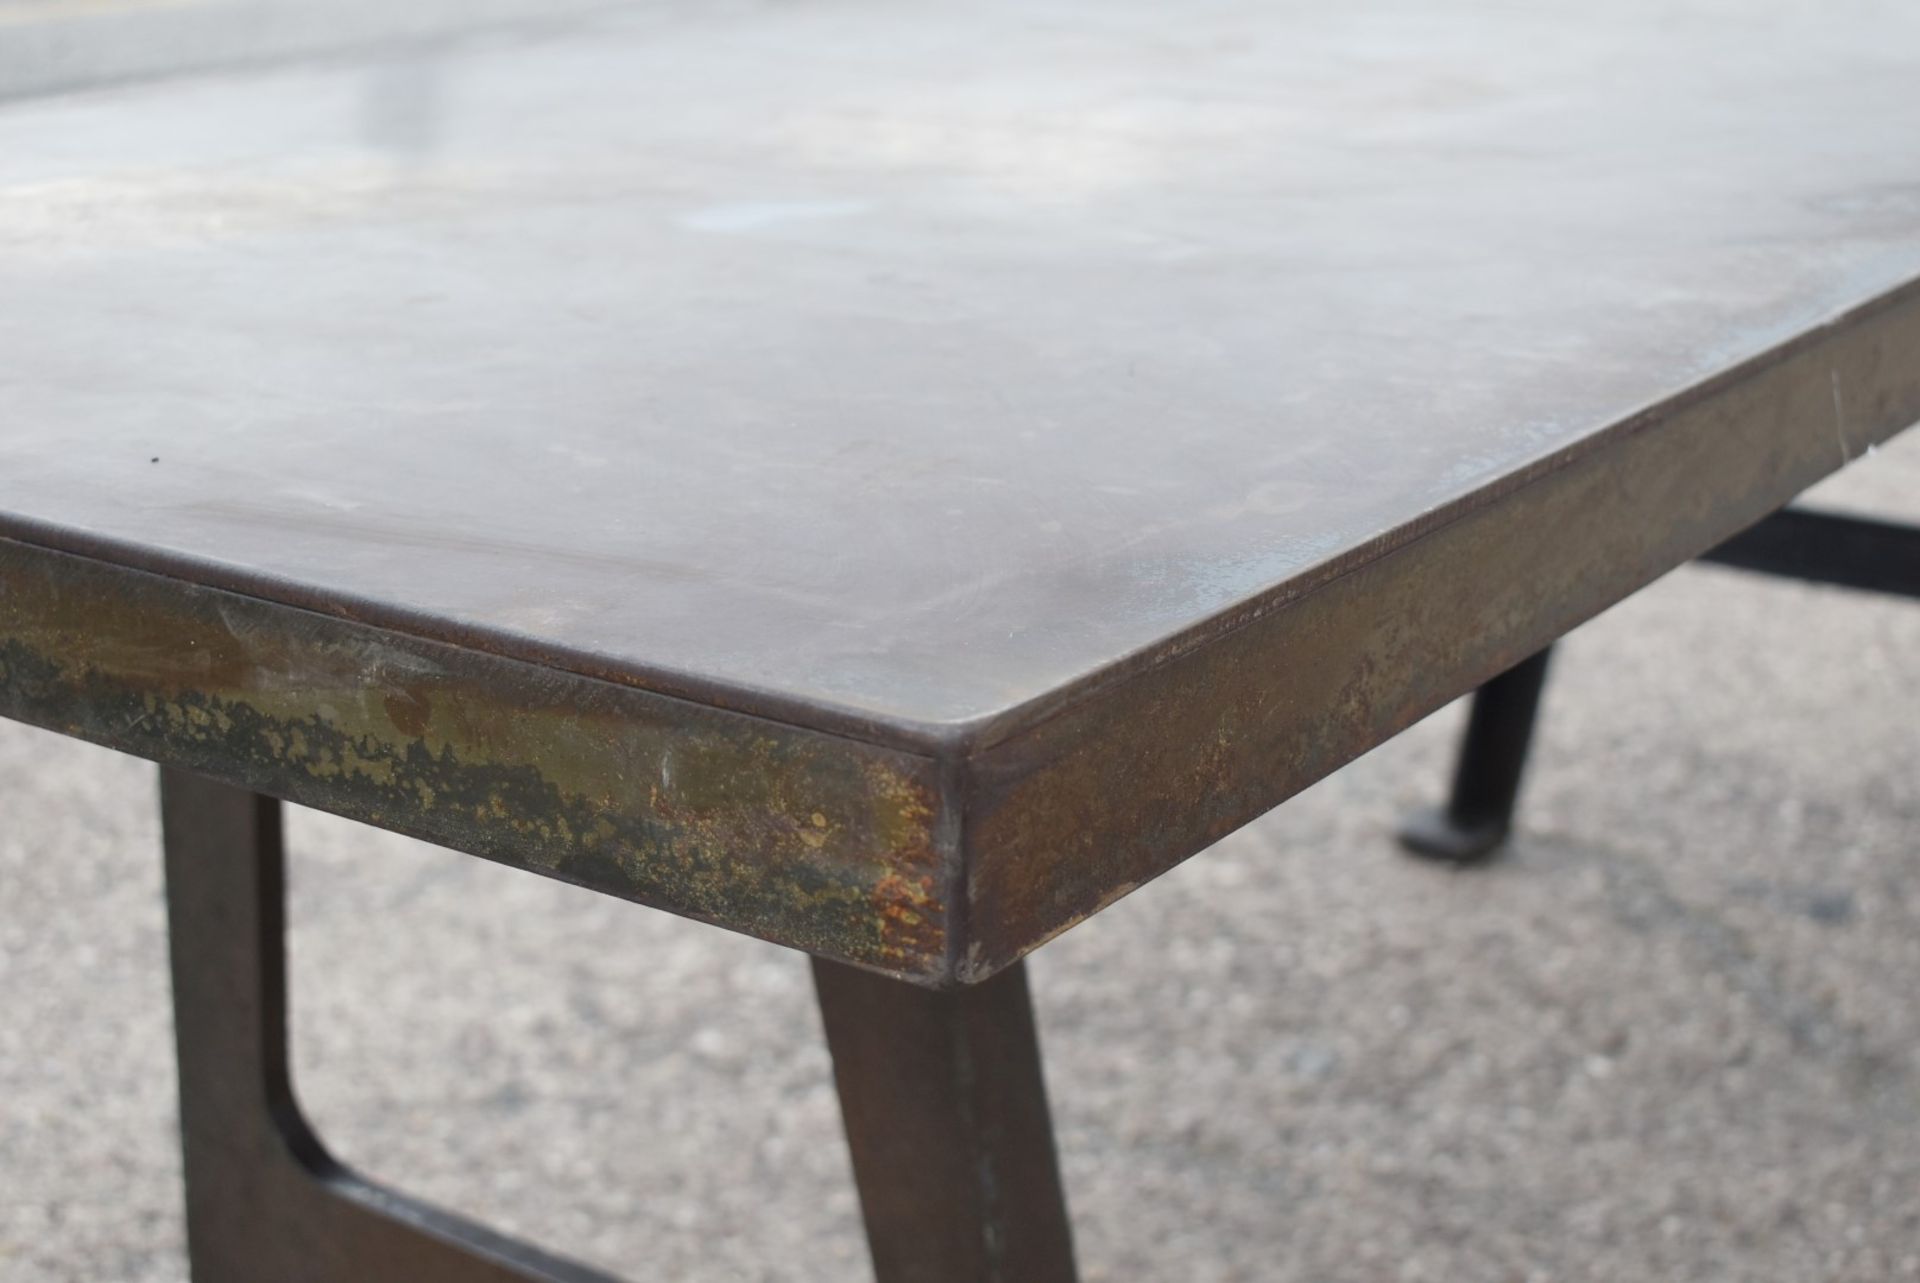 1 x Industrial Style 200cm Banquetting Restaurant Table Featuring a Heavy Steel Top & Steel Legs - Image 2 of 23